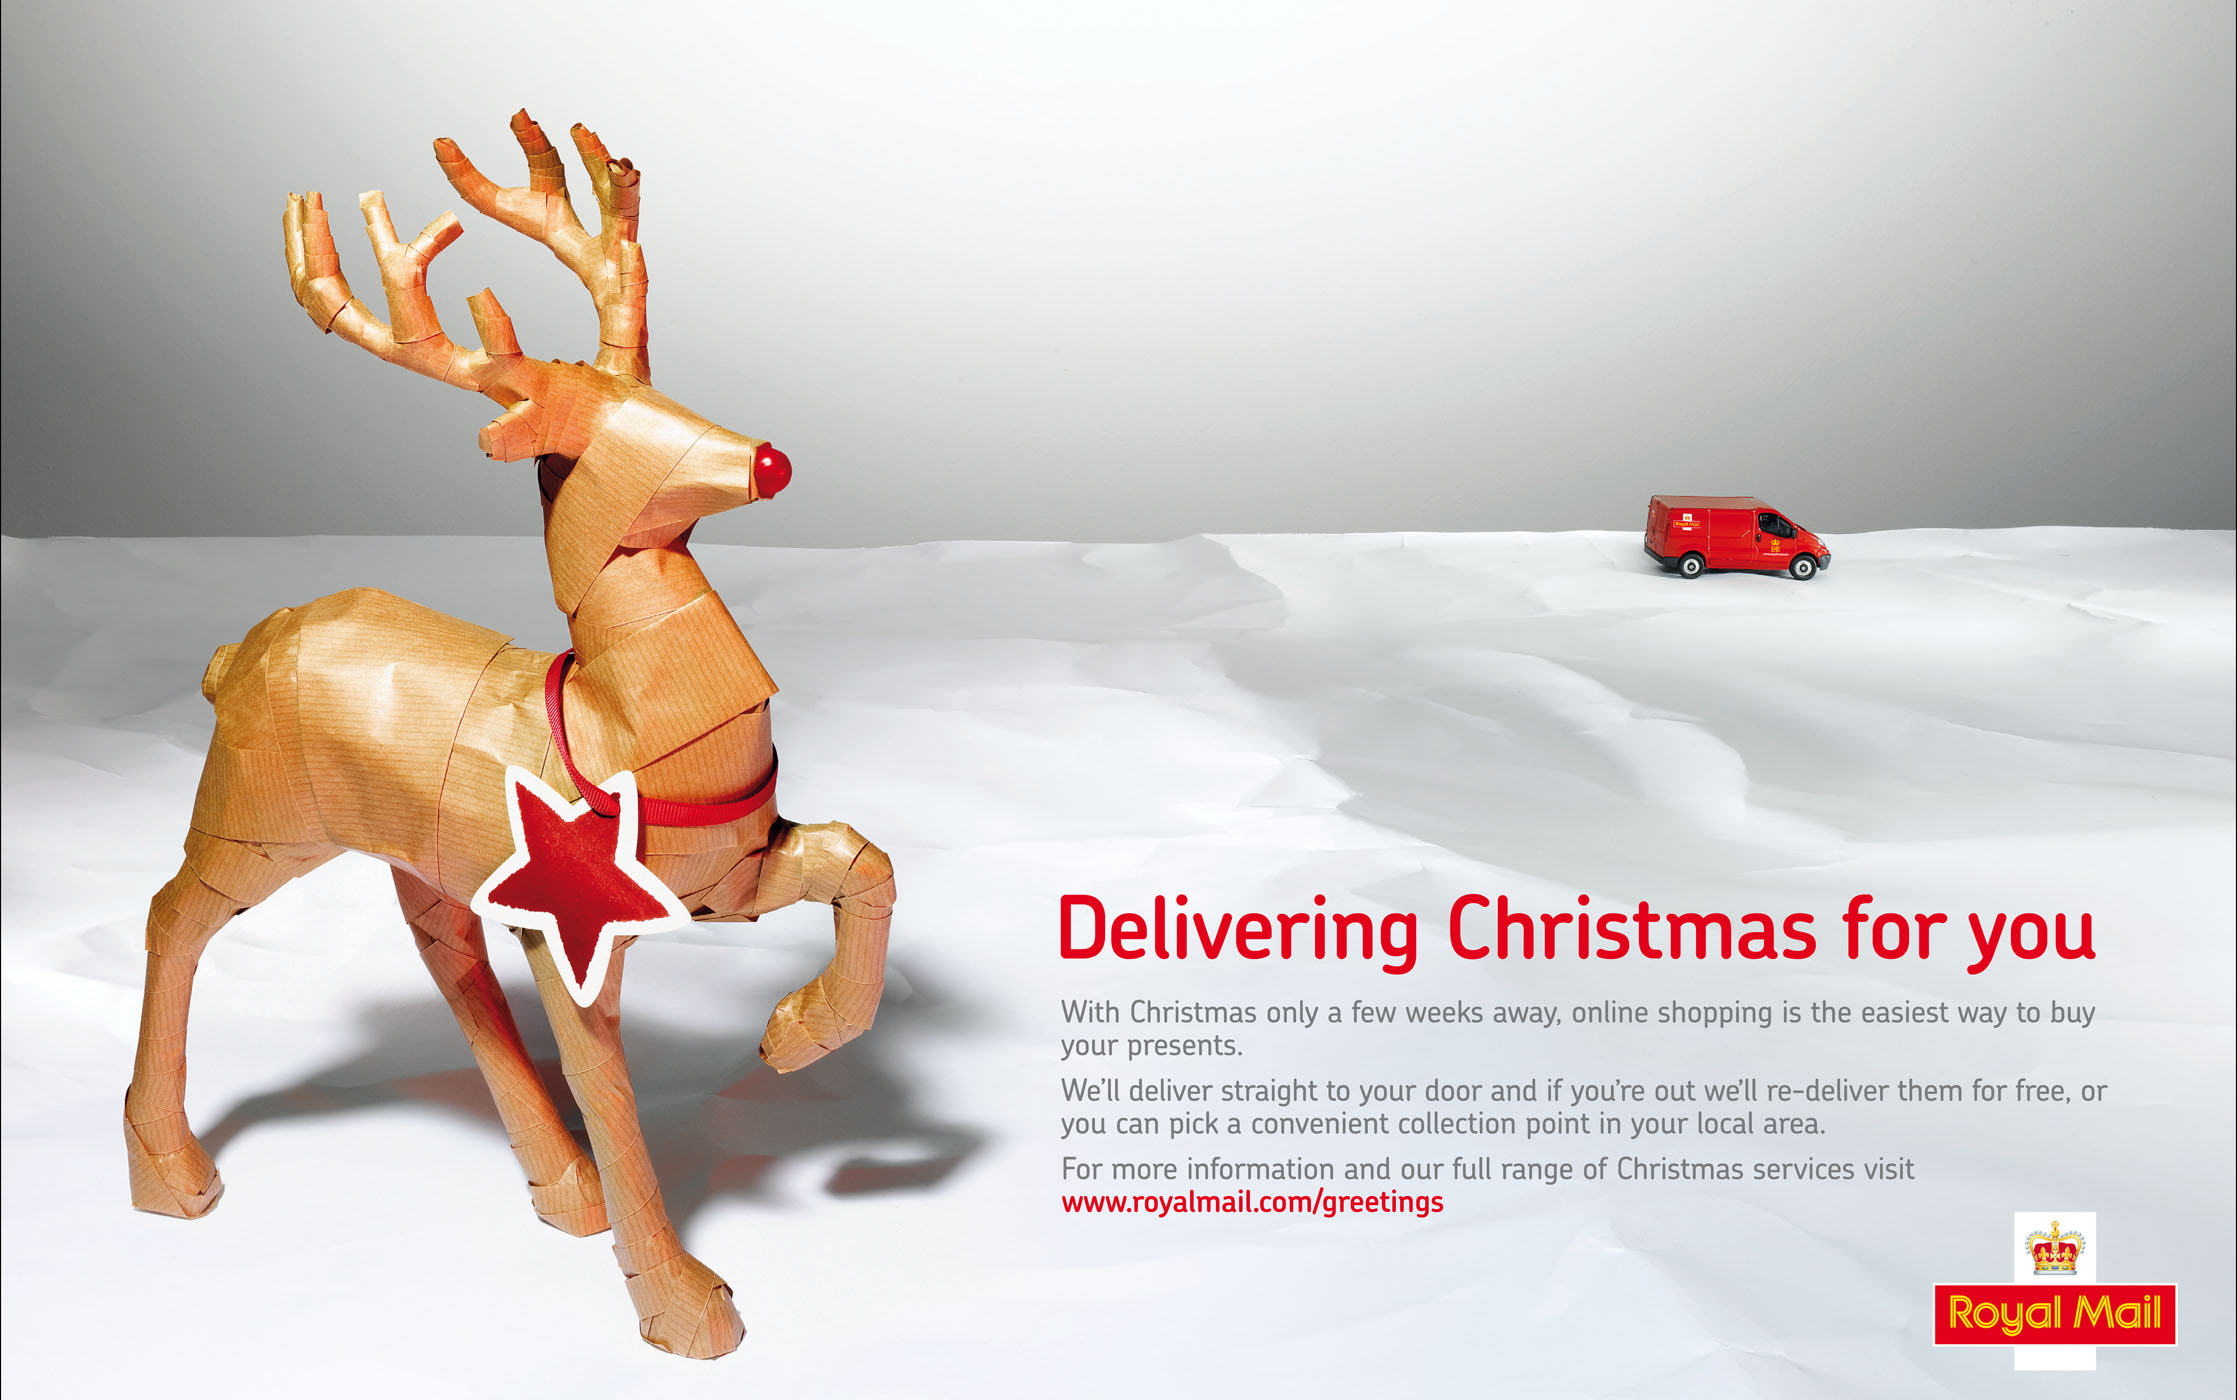 Deer wrapped in paper by Royal Mail by Alexander Kent London based still life and product photographer.